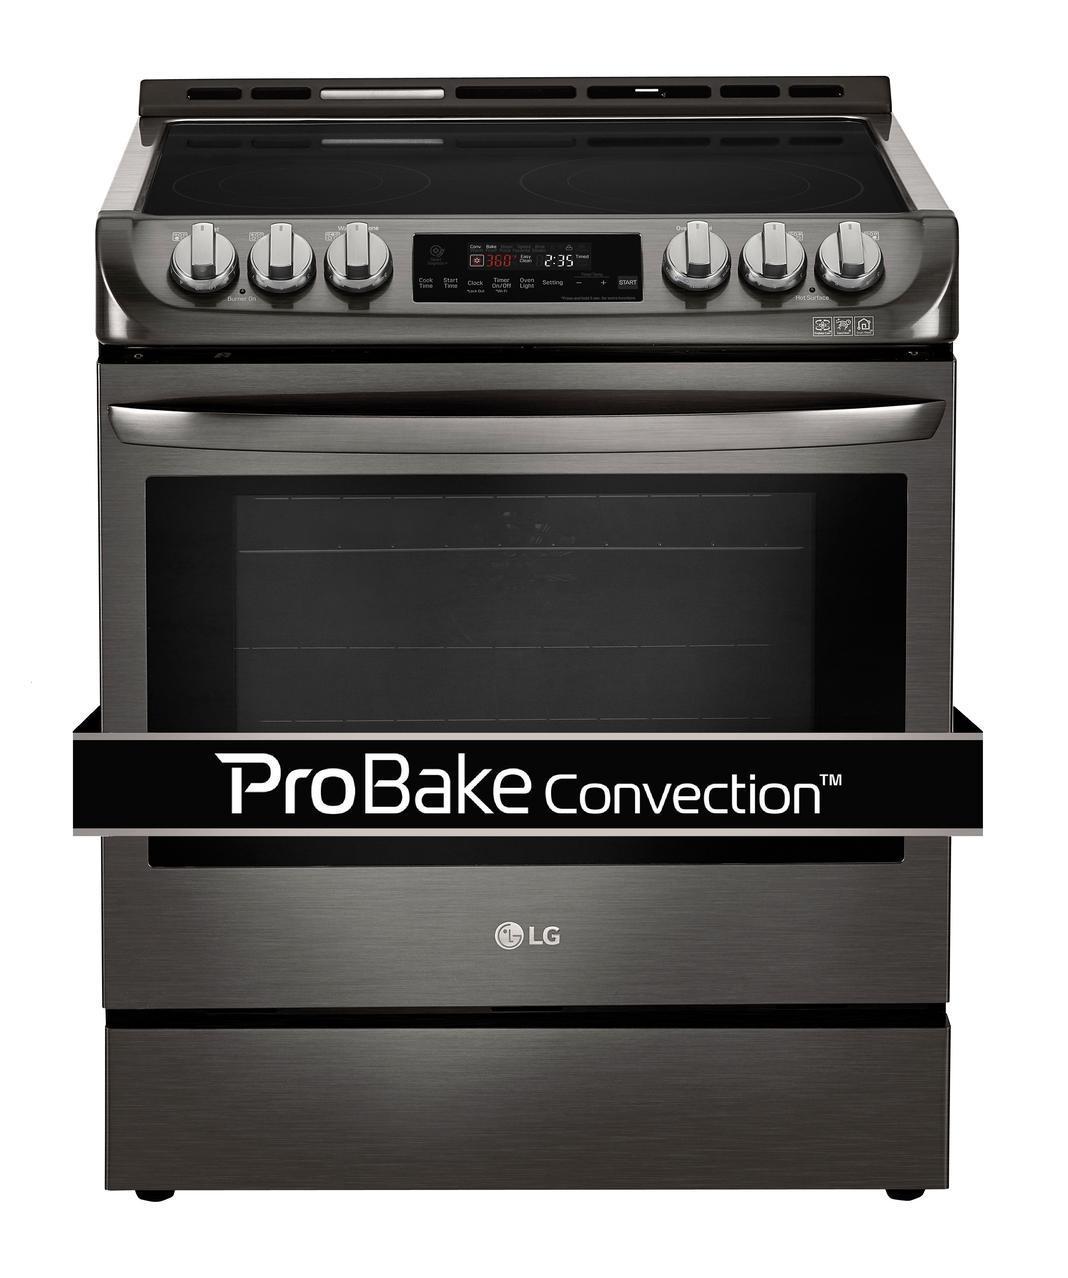 LG - 6.3 cu. ft  Electric Range in Black Stainless - LSE4611BD